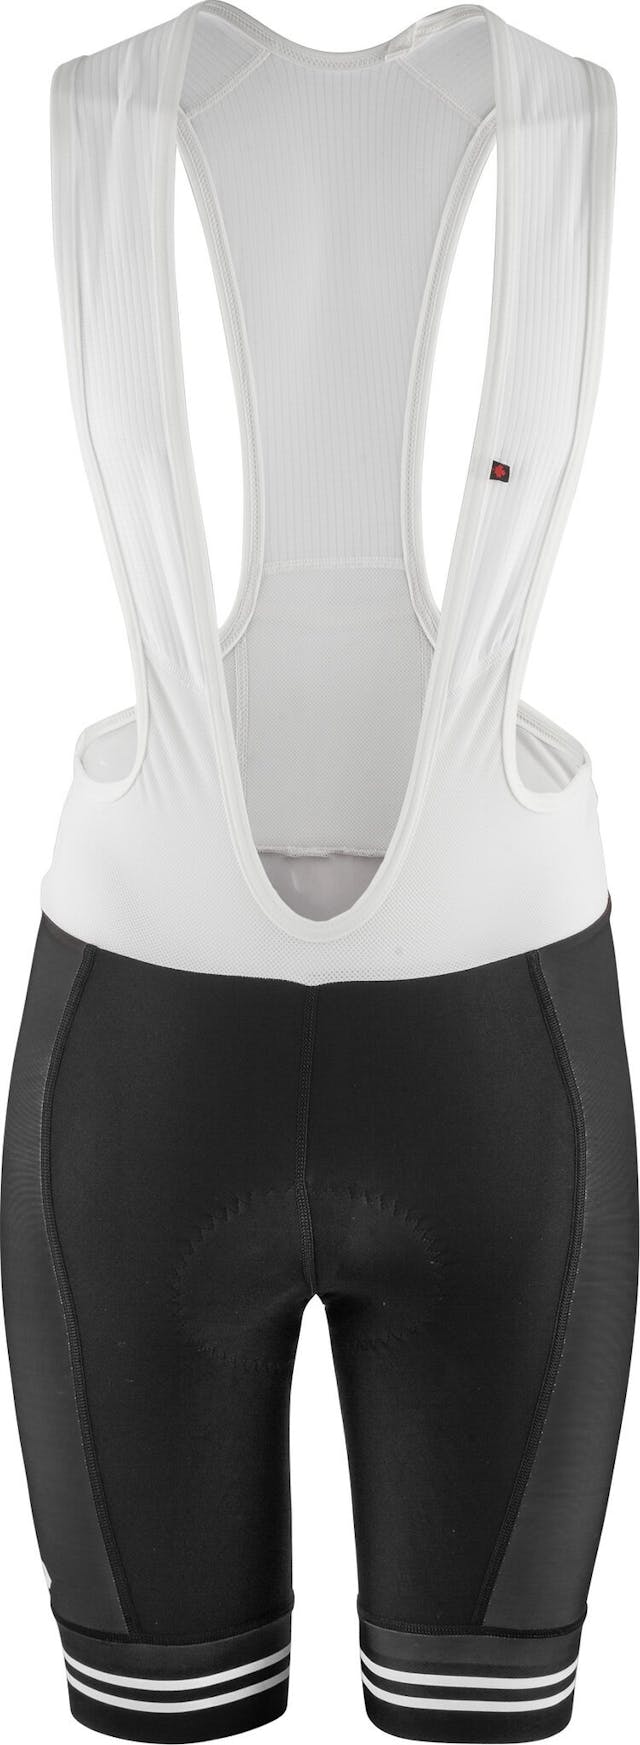 Product image for Pacer Bib - Men's